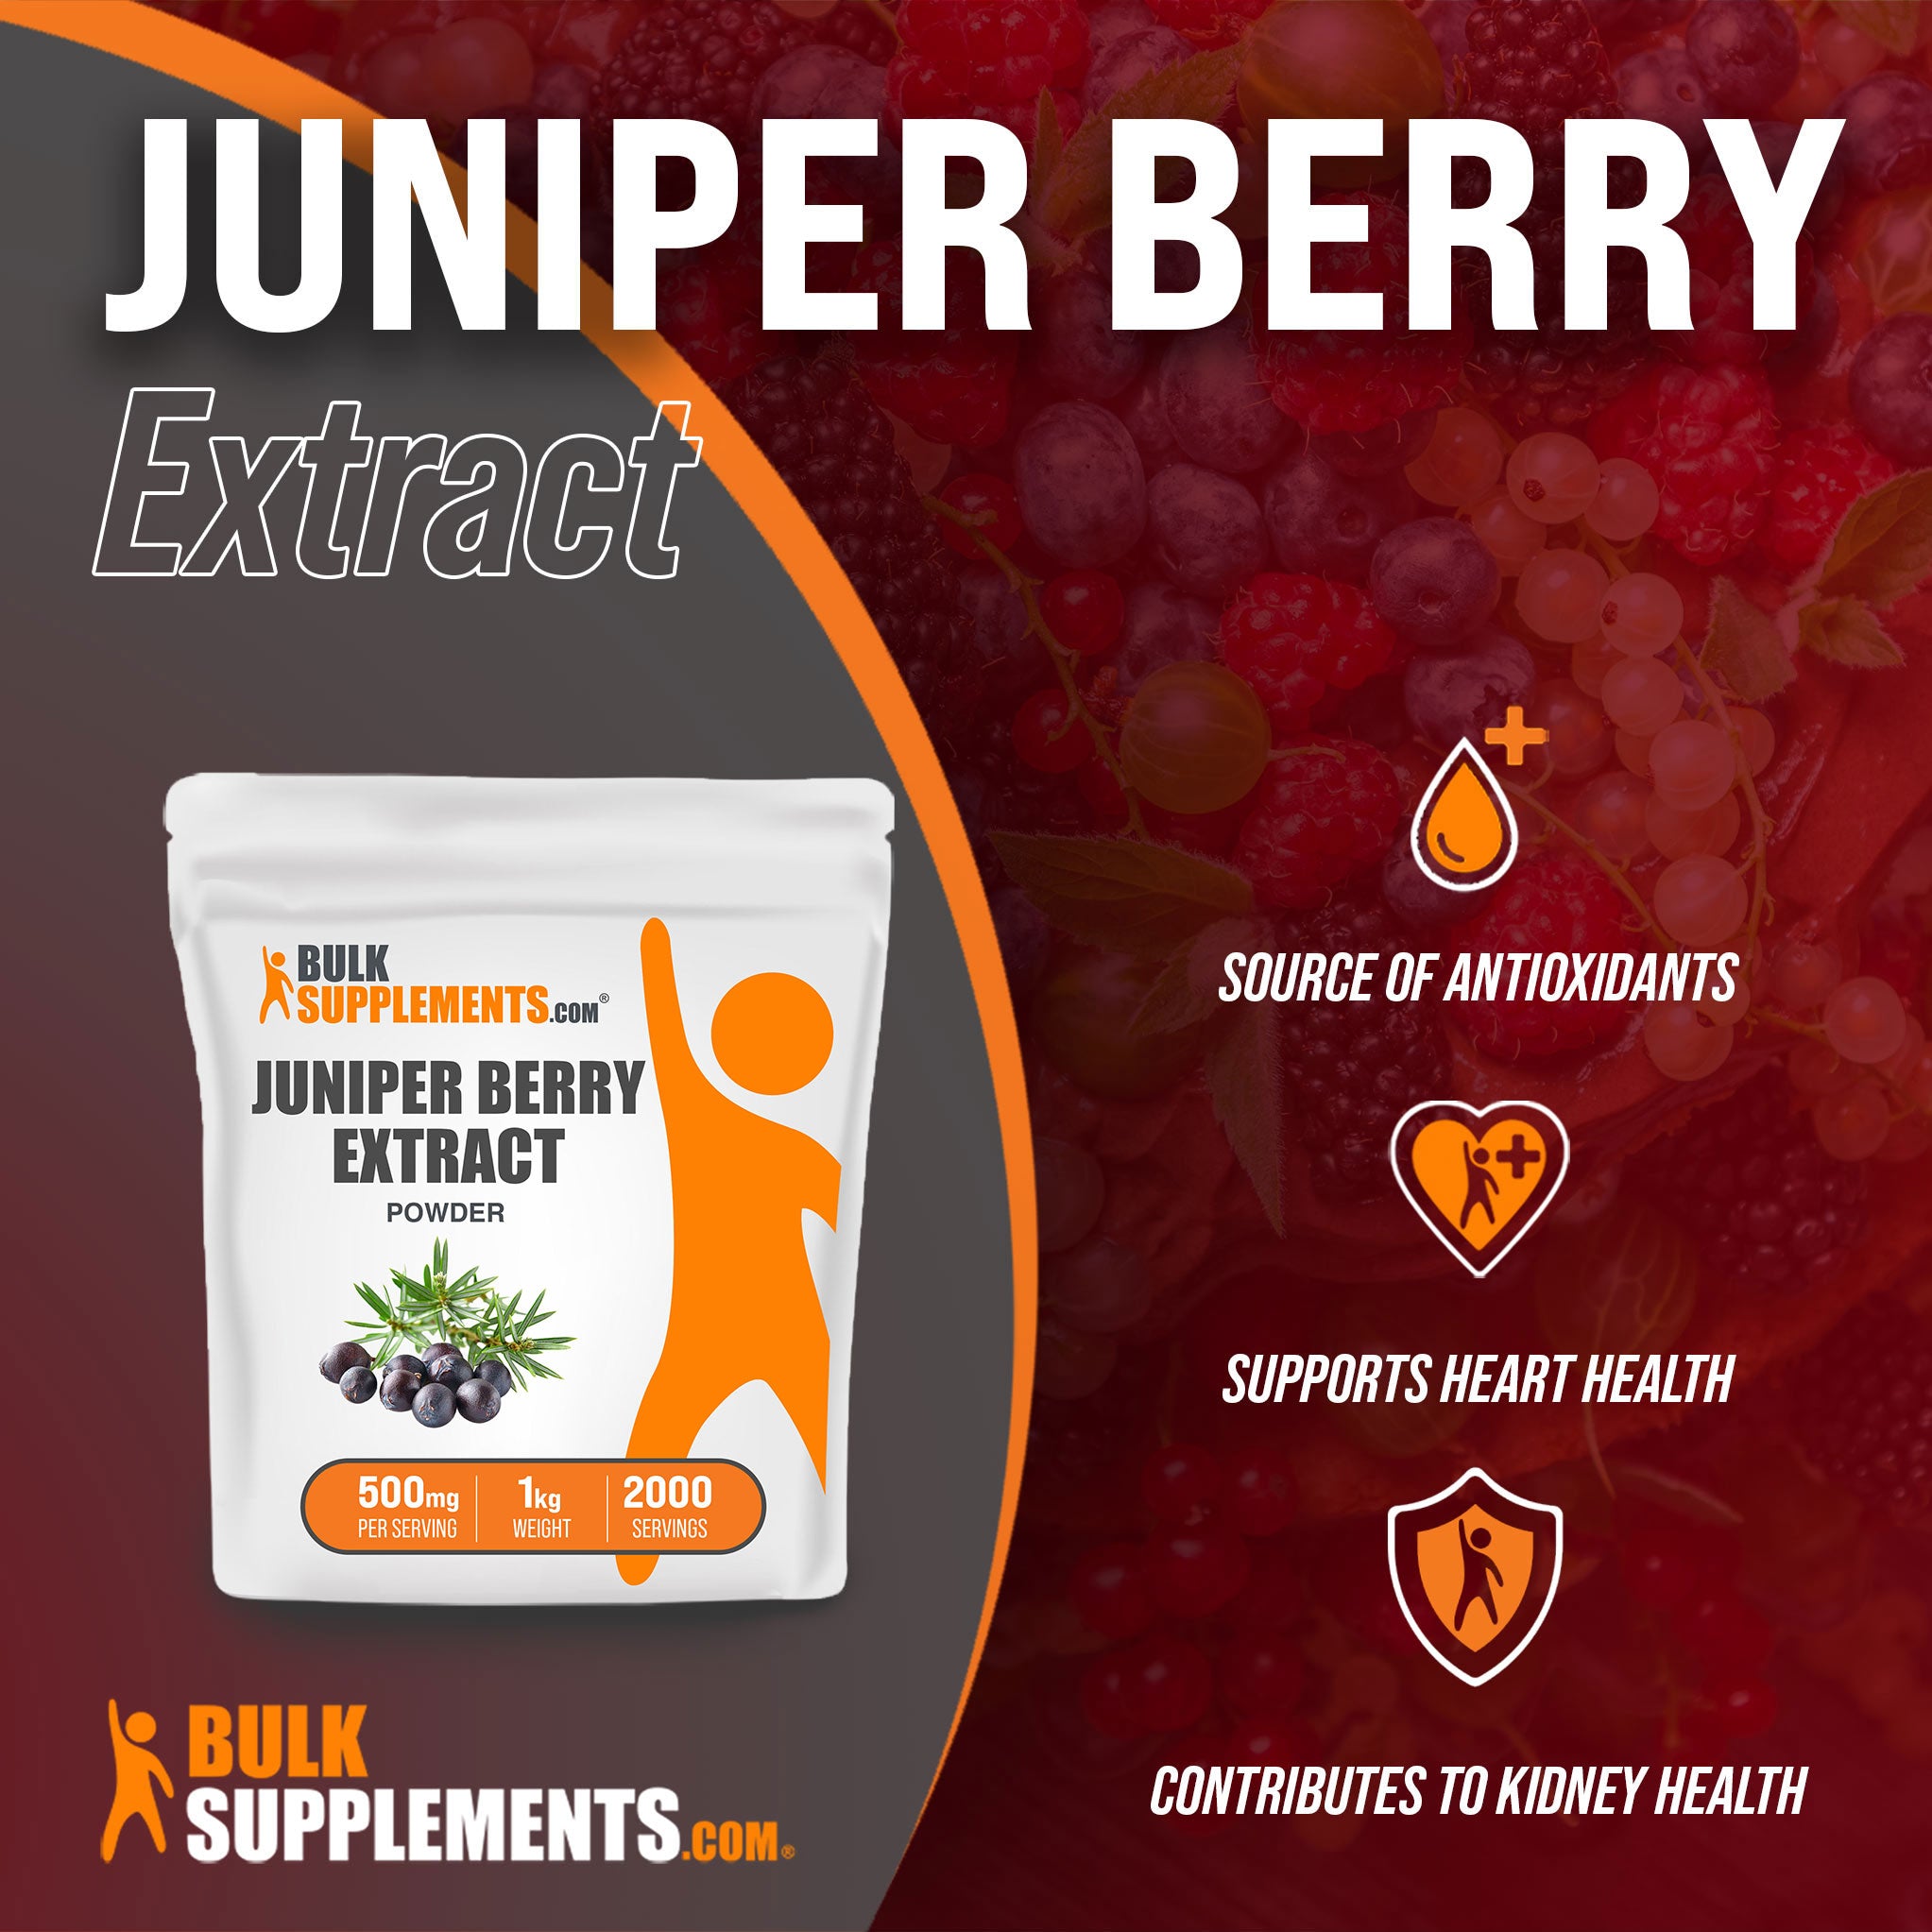 Benefits of Juniper Berry Extract; source of antioxidants, supports heart health, contributes to kidney health